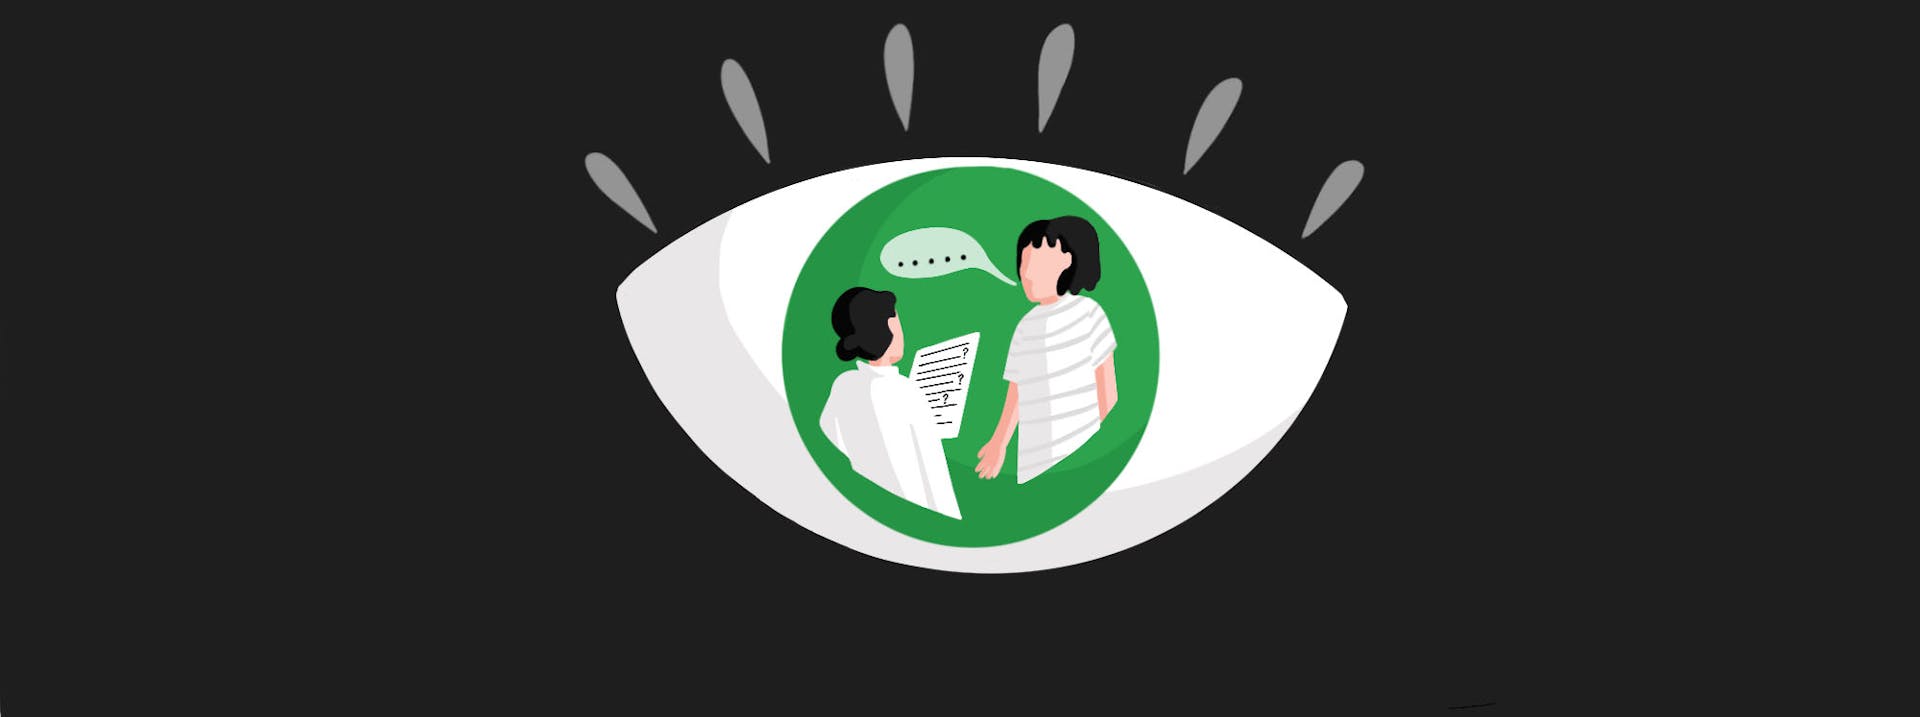 Illustration of an eye with a green iris, and inside the iris are two people: one holds a script and the other is speaking